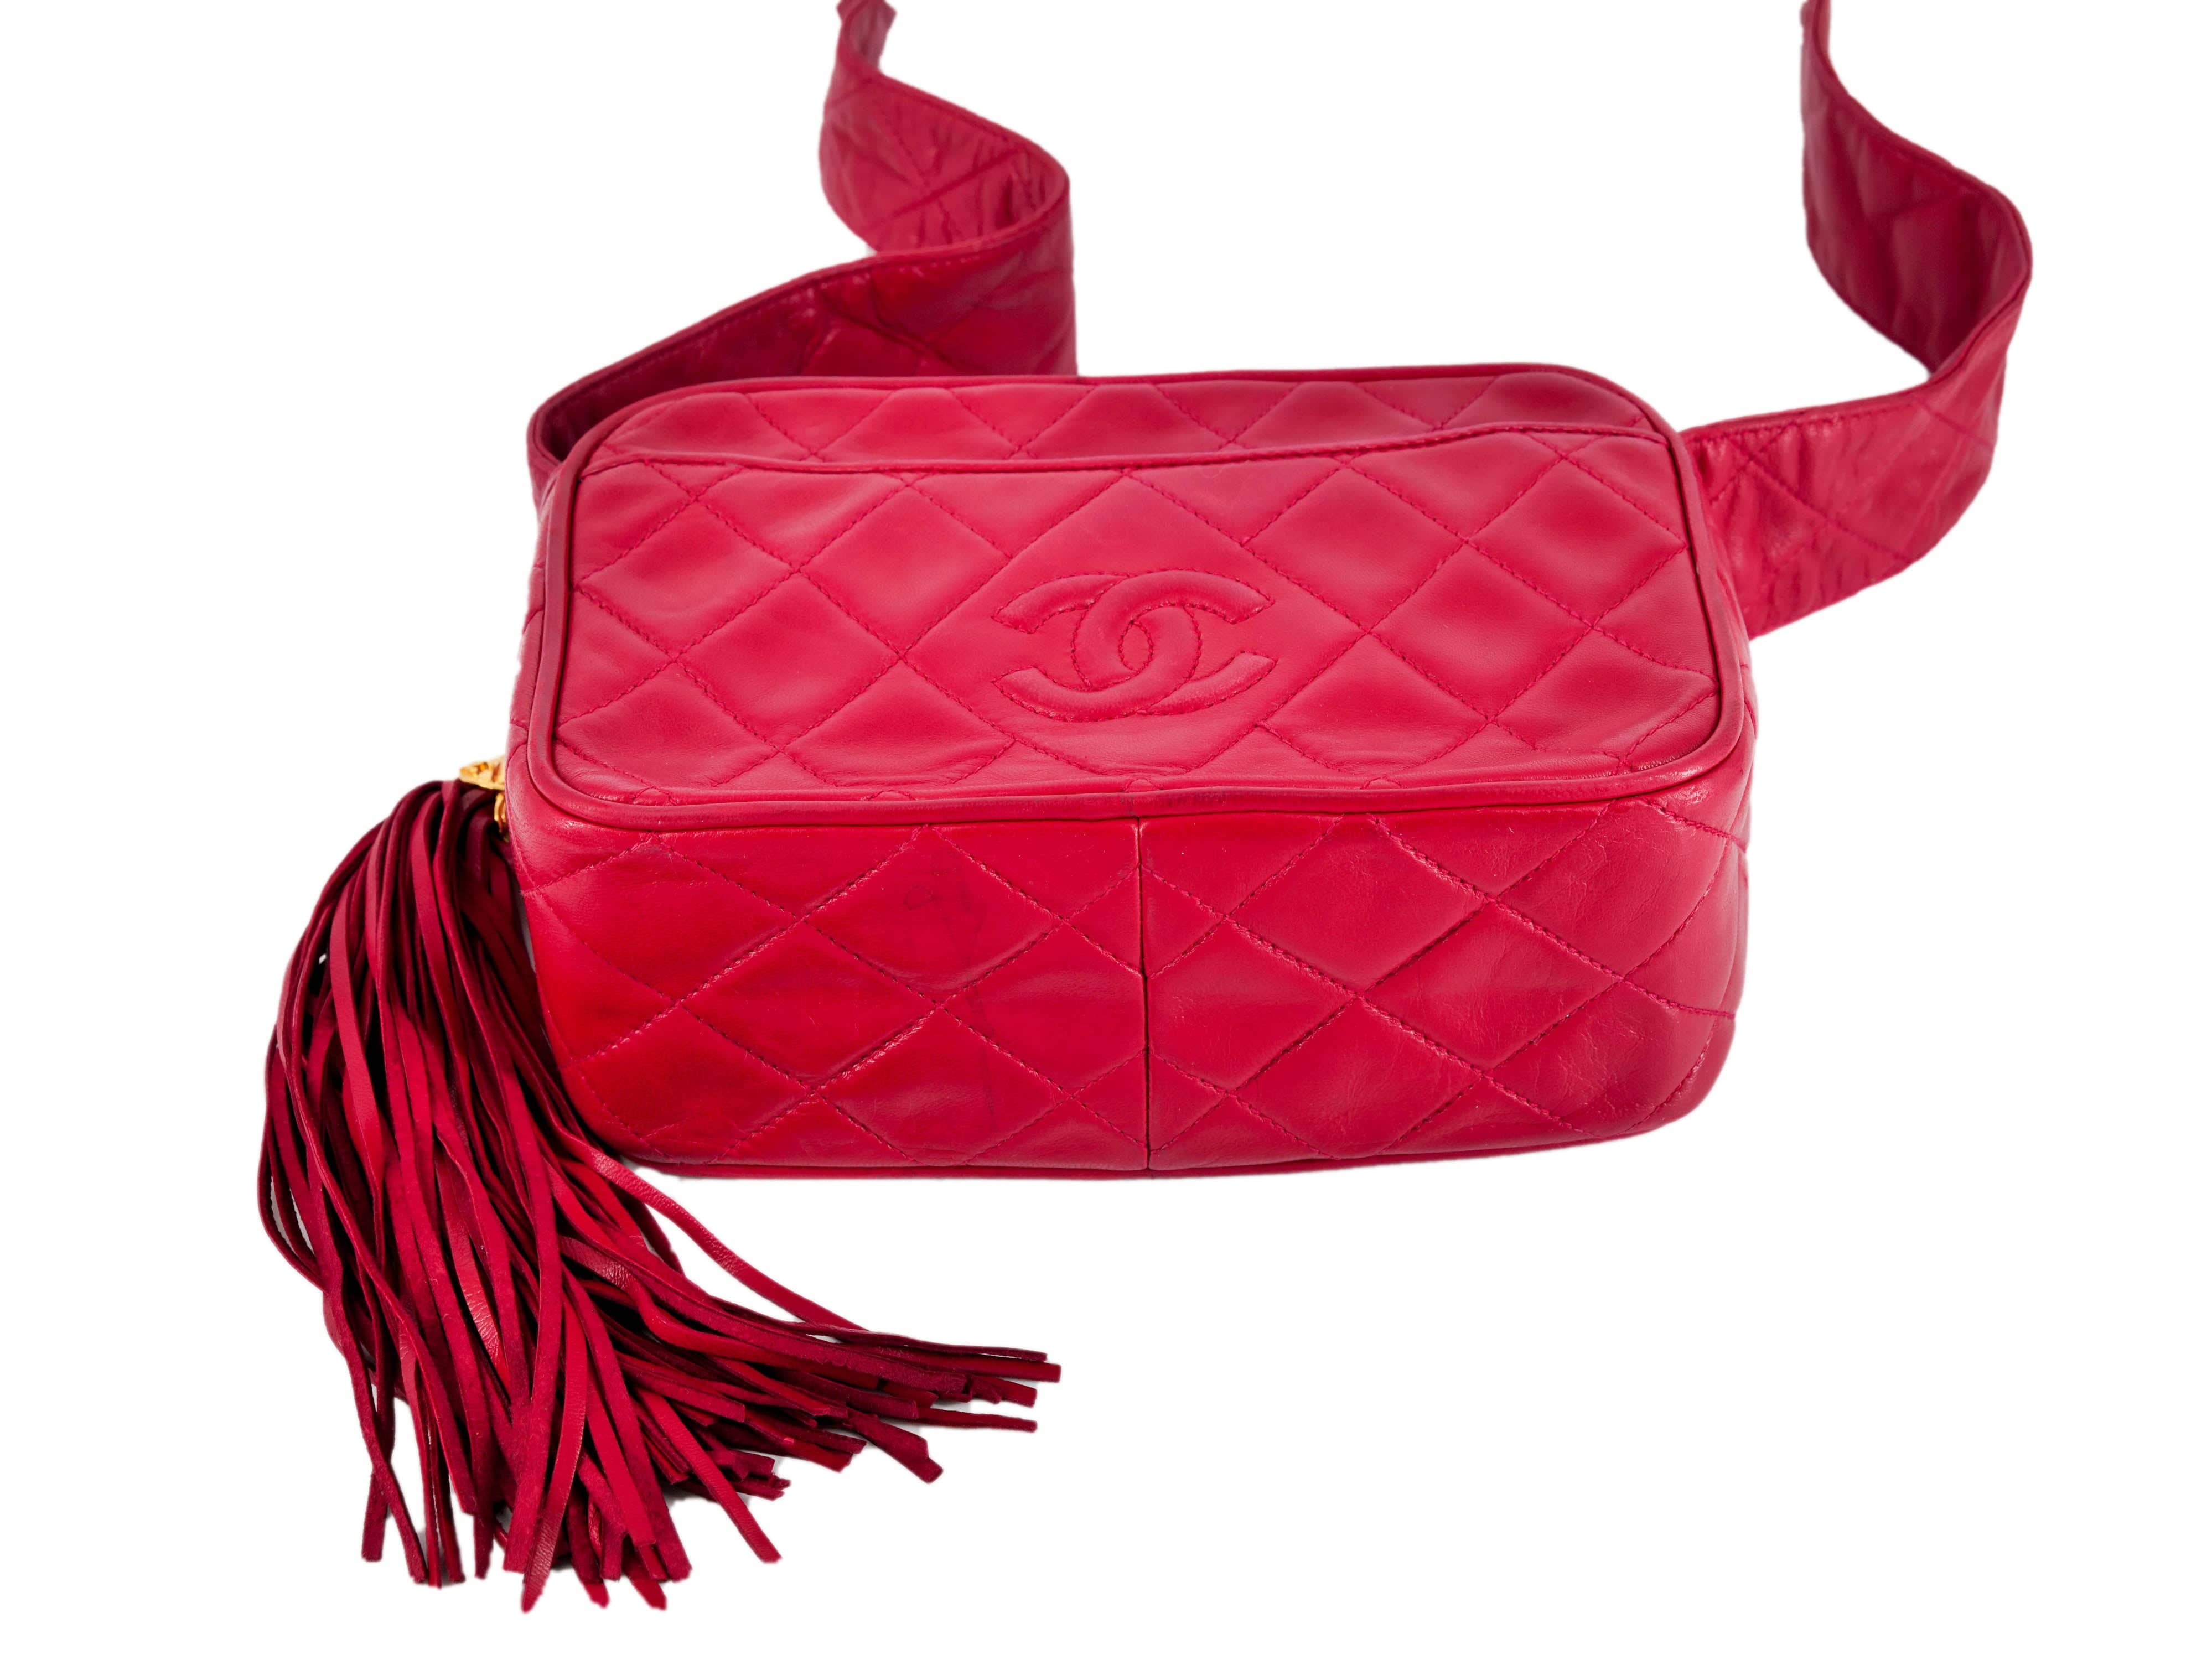 Chanel Chanel Red Lambskin Quilted Bag with GHW - AWC1262